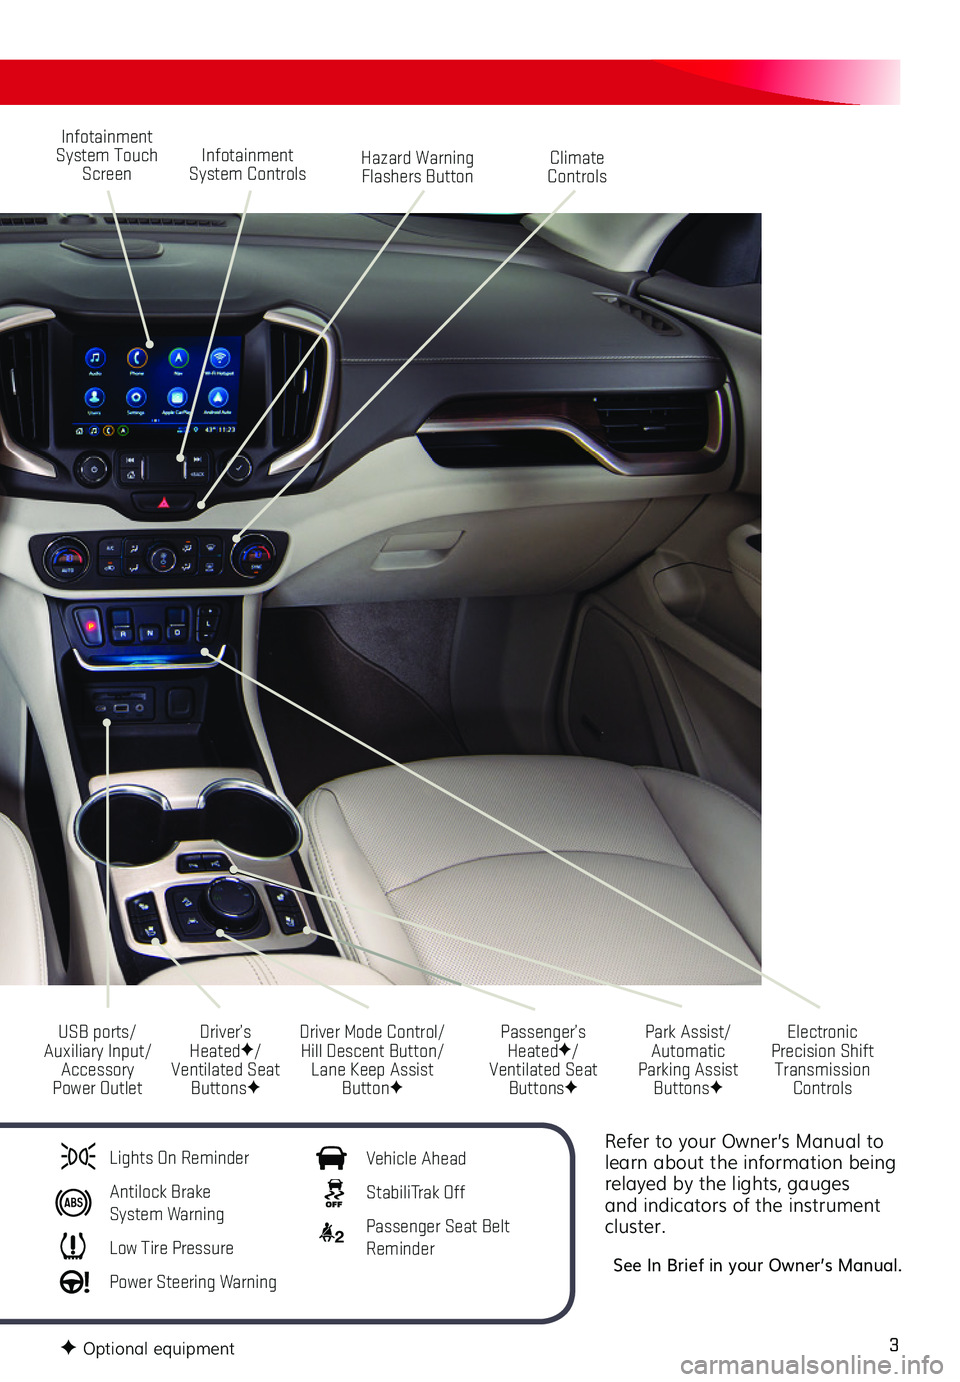 GMC TERRAIN 2019  Get To Know Guide 3
Refer to your Owner’s Manual to learn about the information being relayed by the lights, gauges and indicators of the instrument cluster.
See In Brief in your Owner’s Manual .
Infotainment Syste